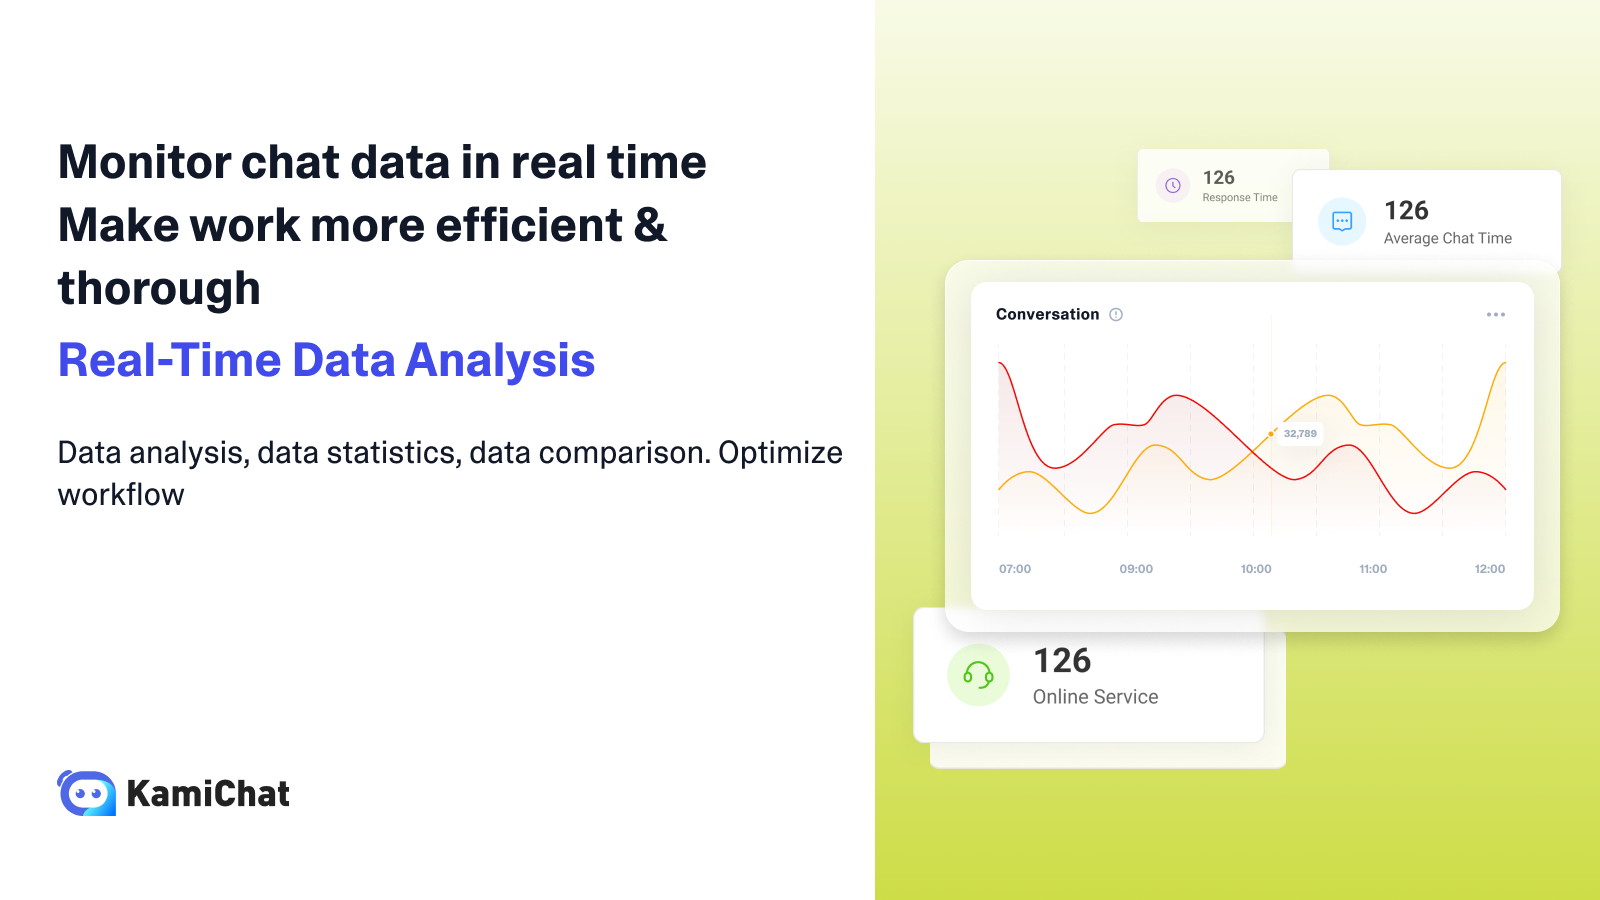 Monitor chat data in real time